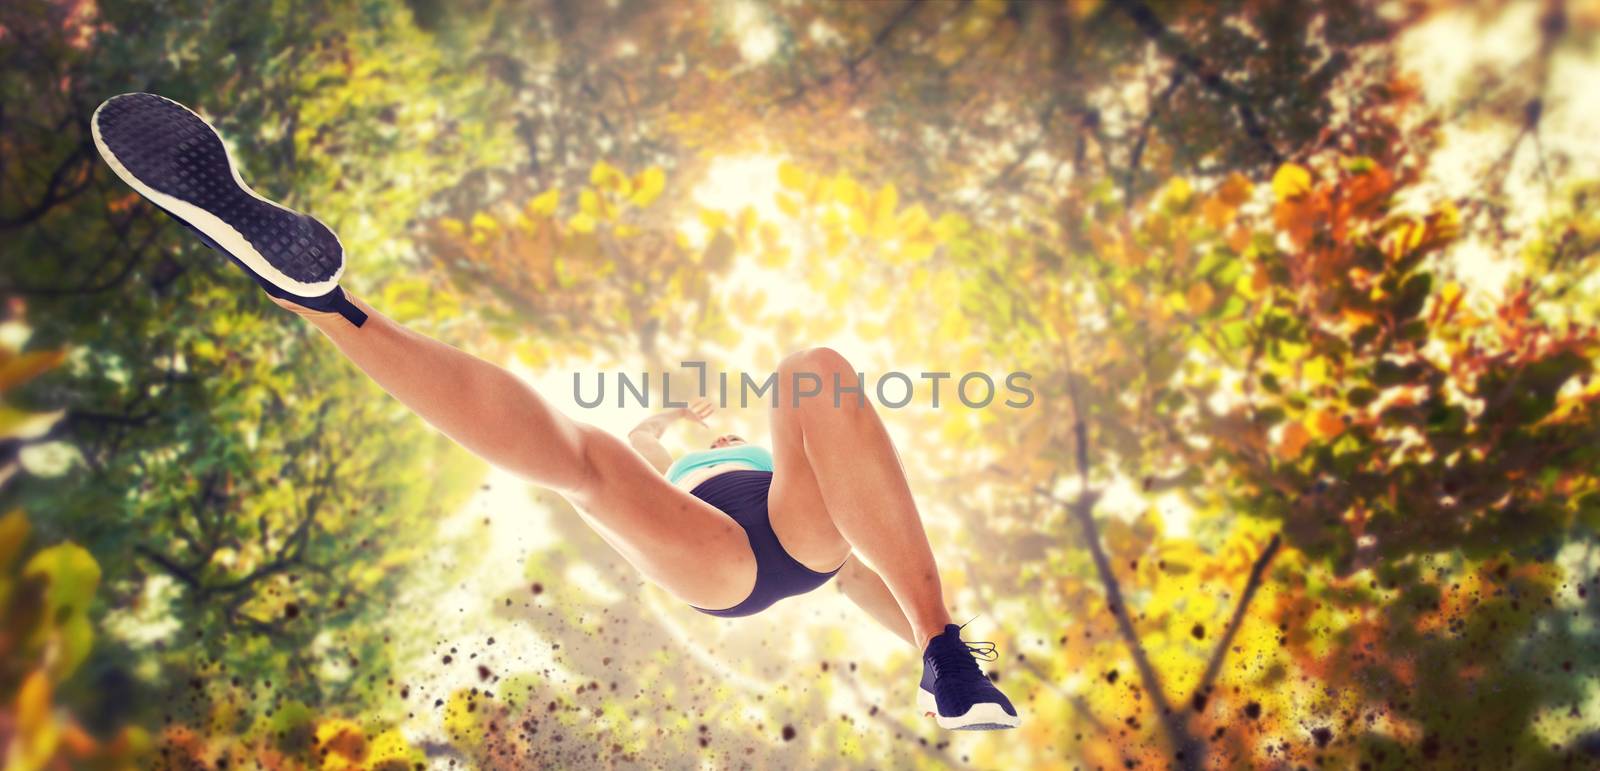 Low angle female athlete jumping against branches and autumnal leaves against the sunlight